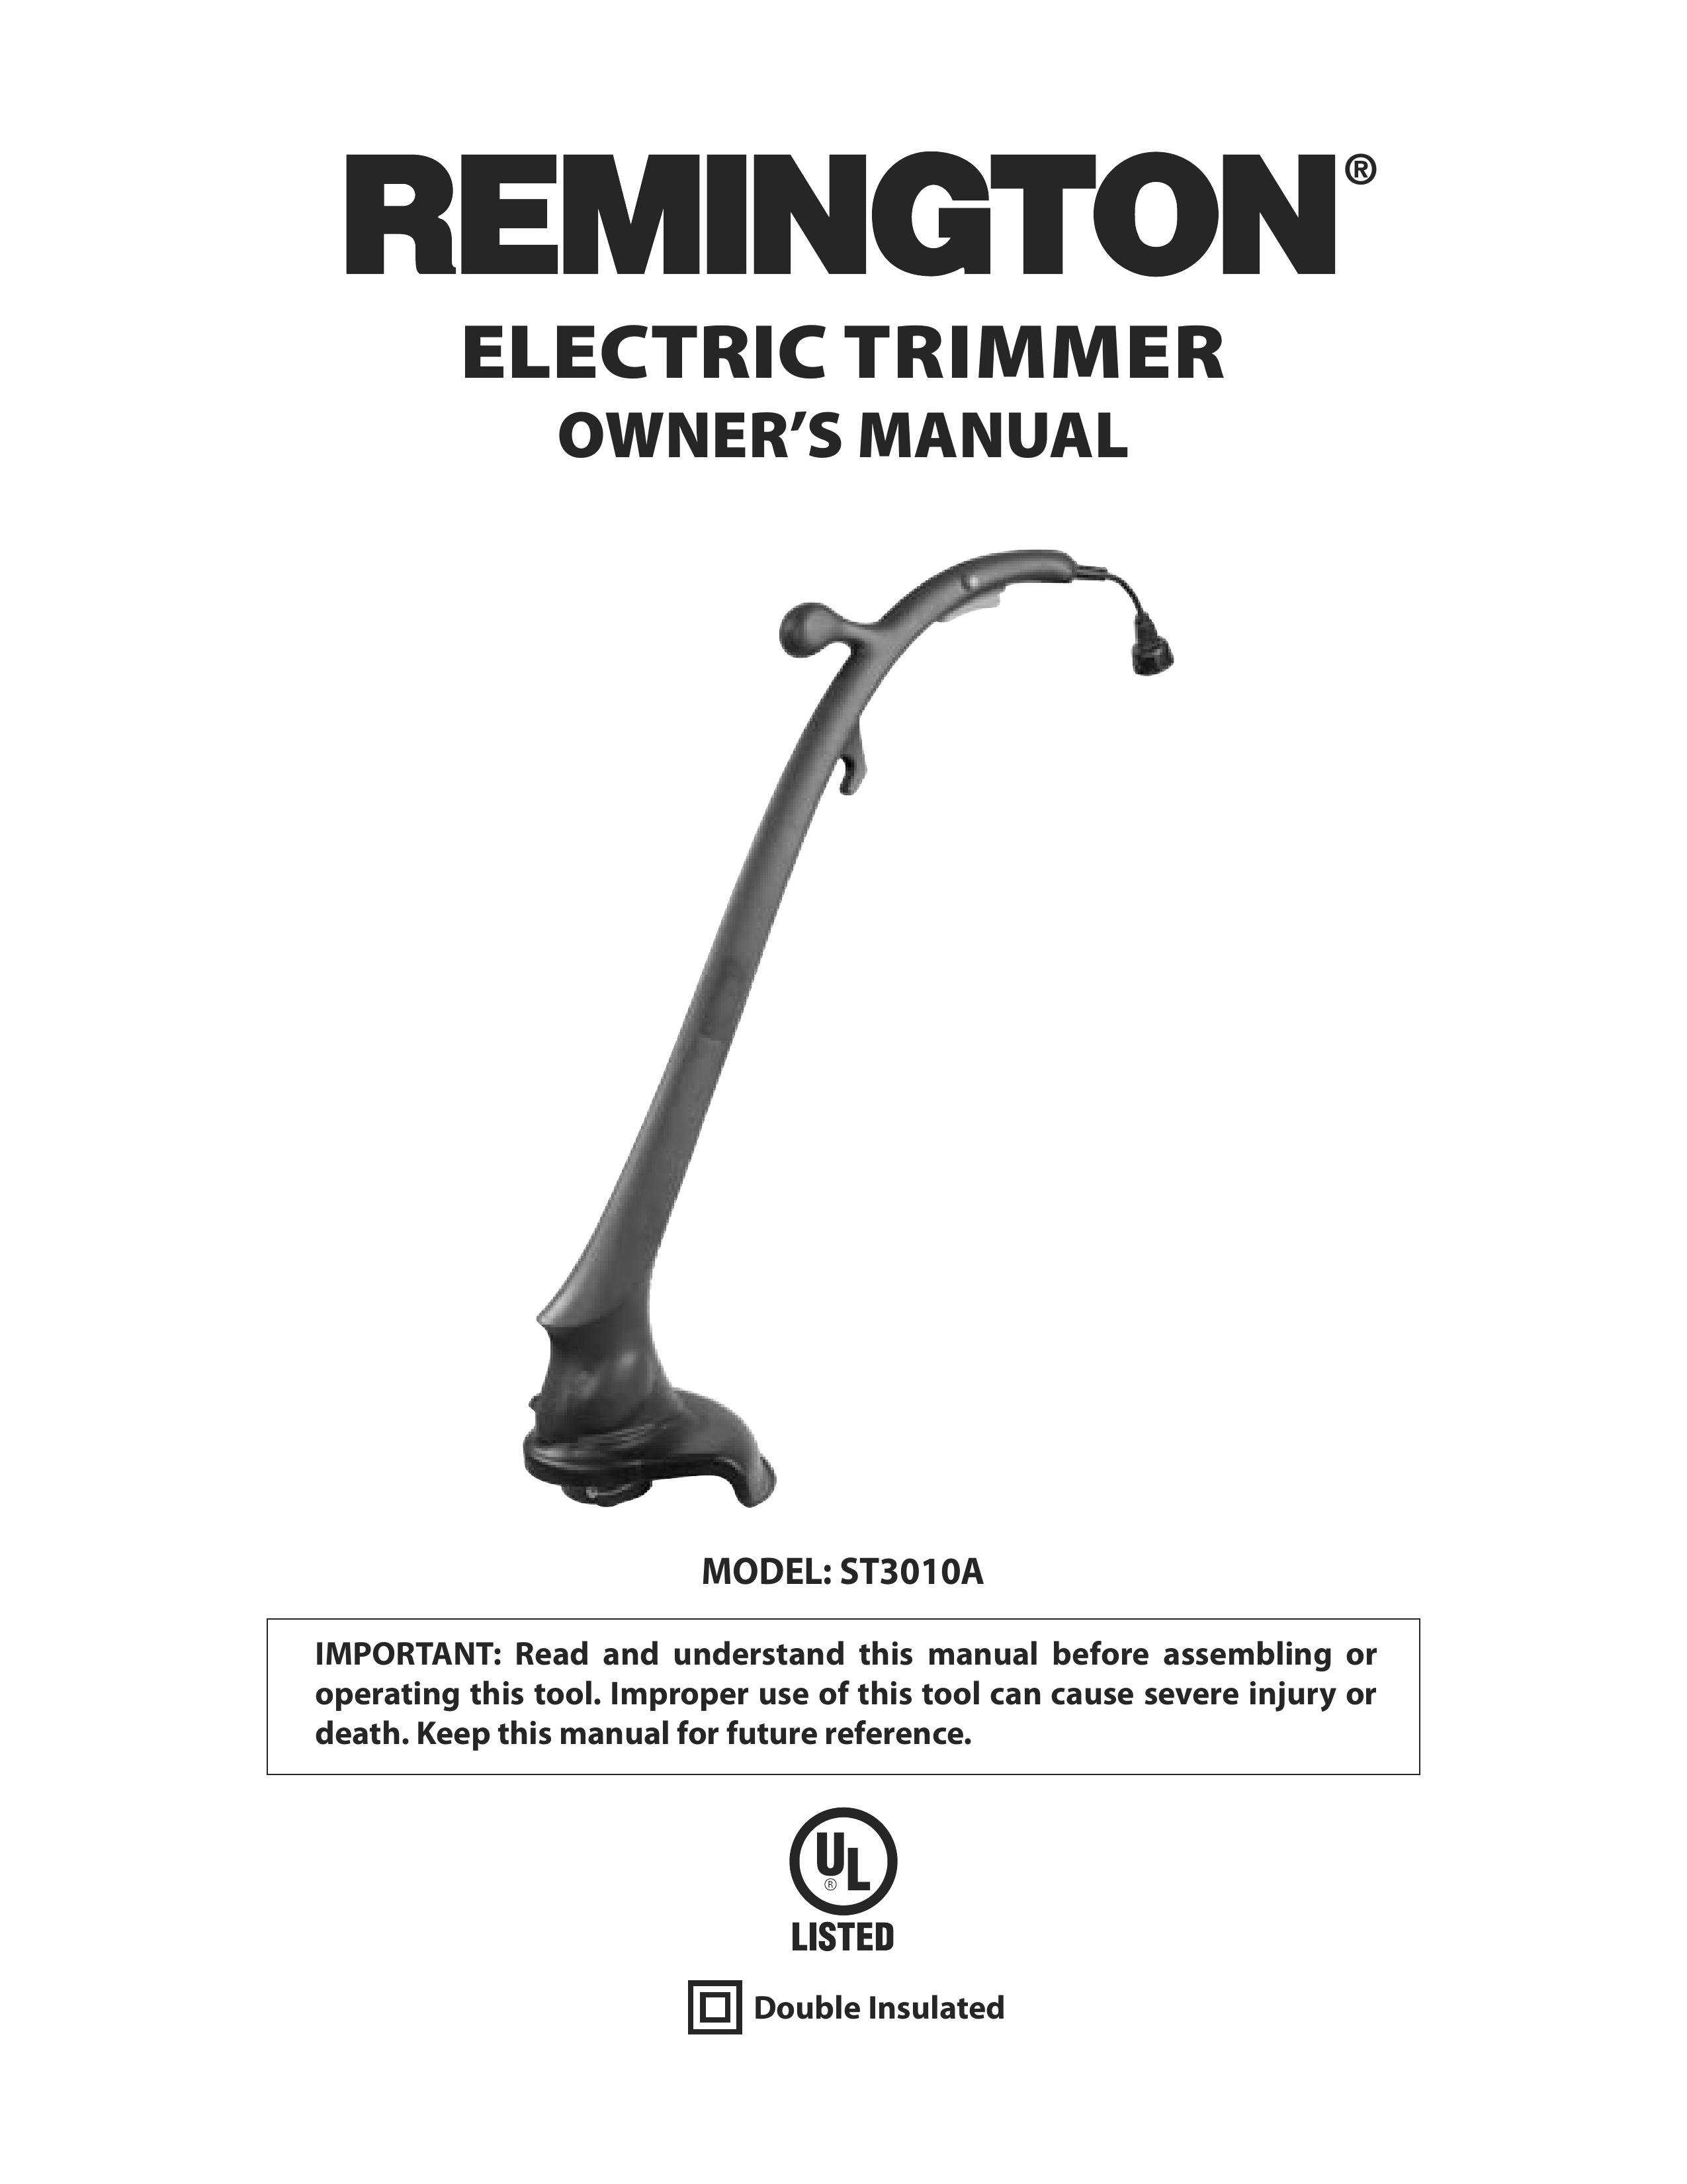 Remington ST3010A Trimmer User Manual